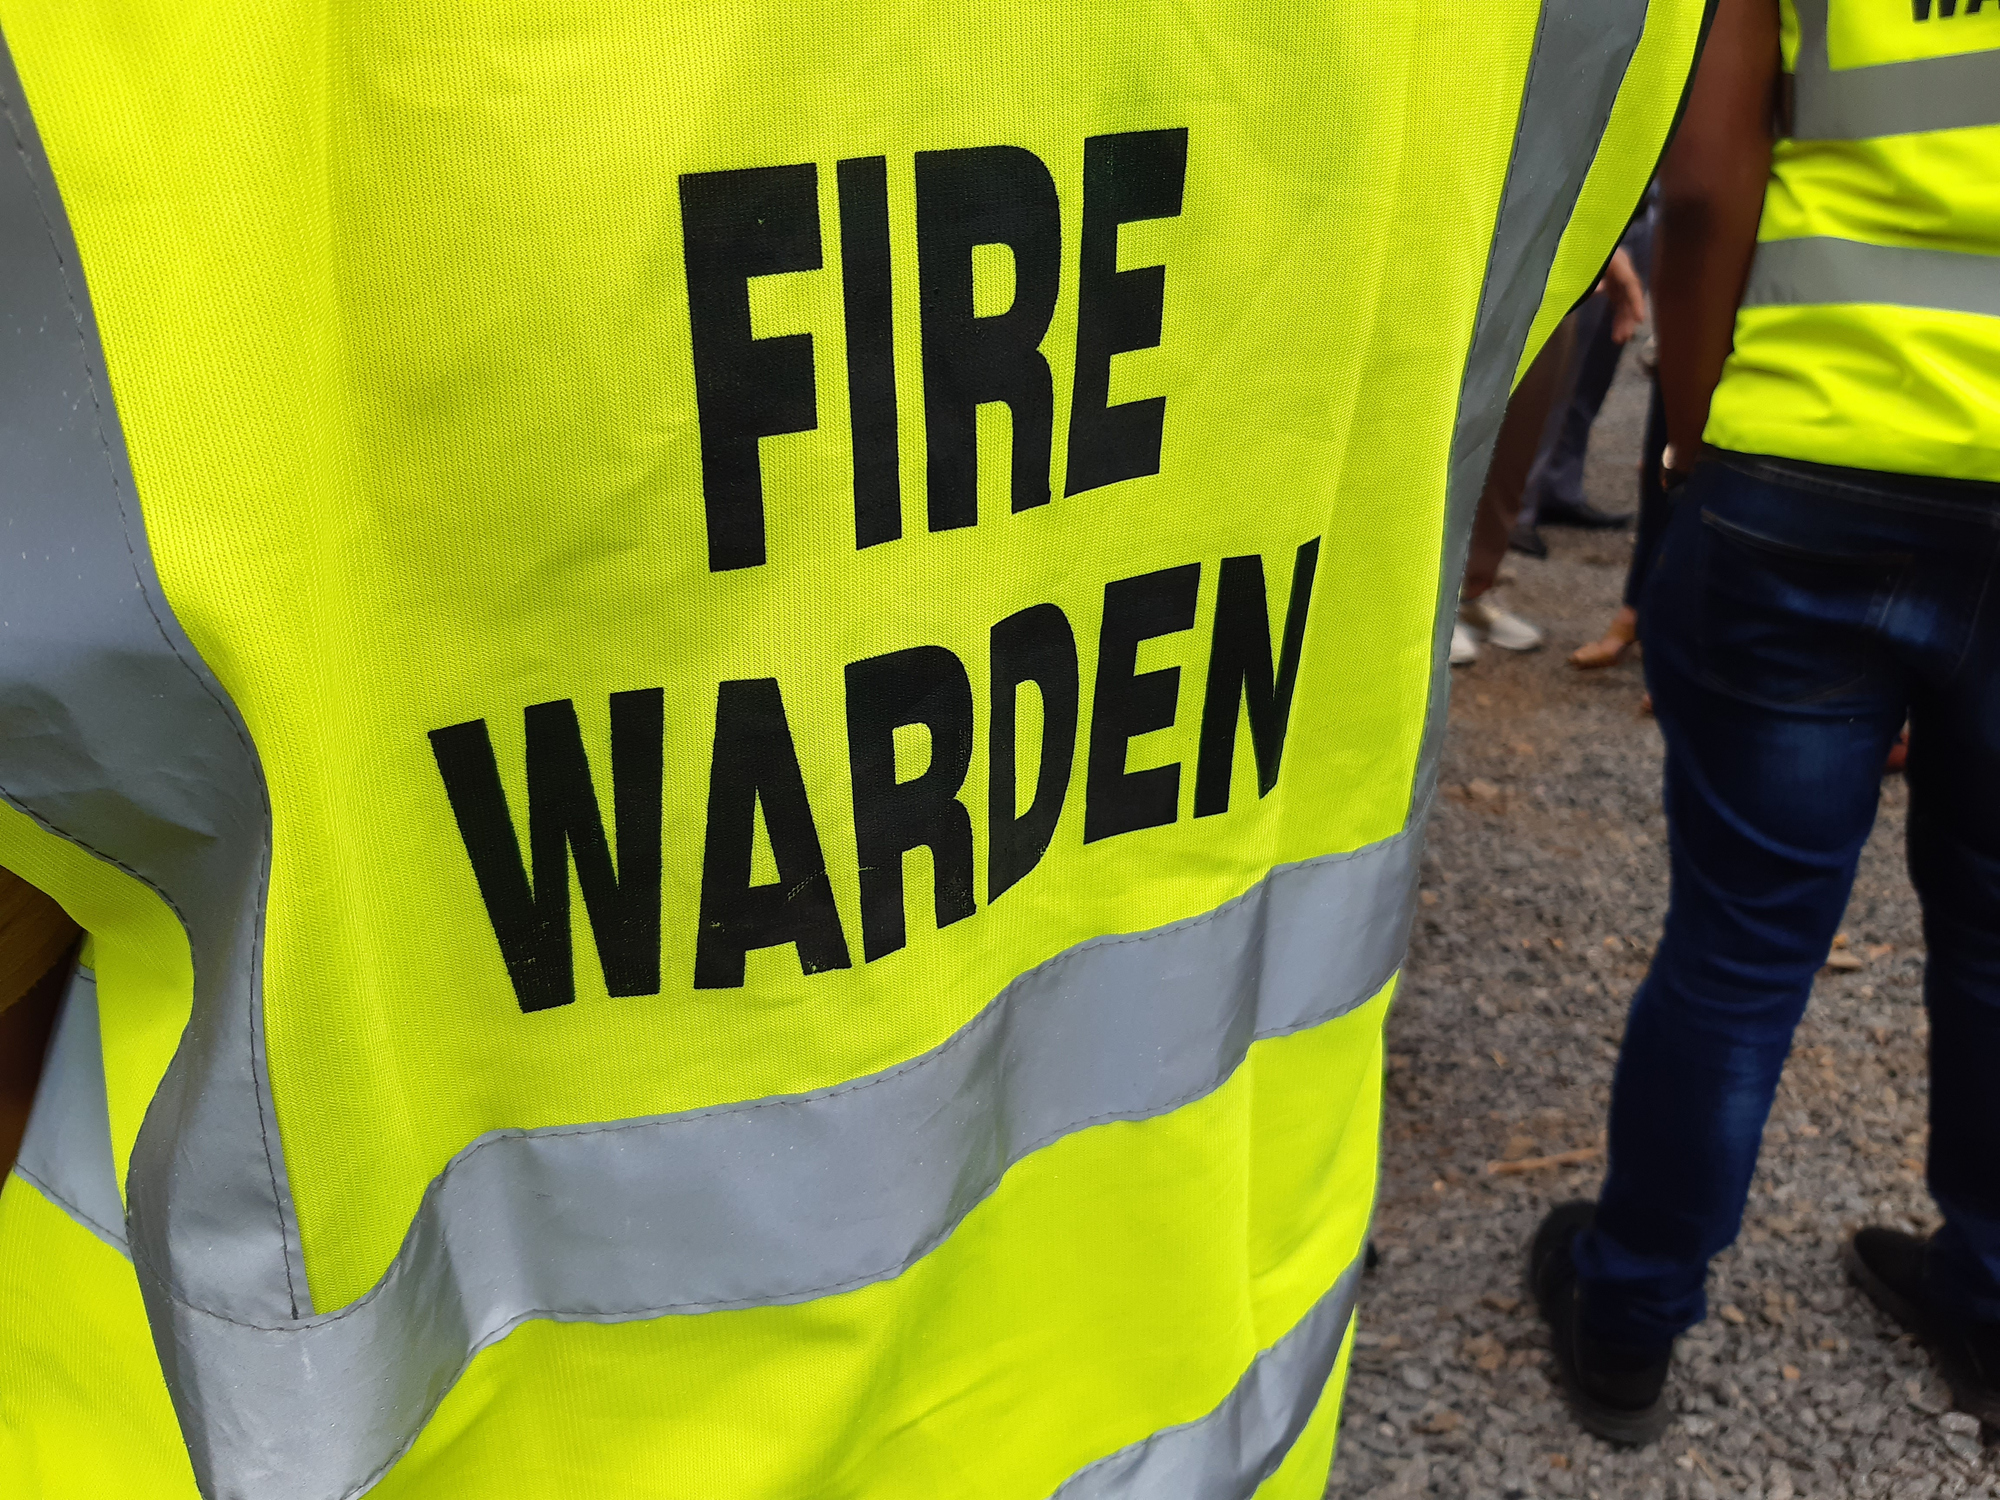 Fire marshal / fire warden with high vis vest